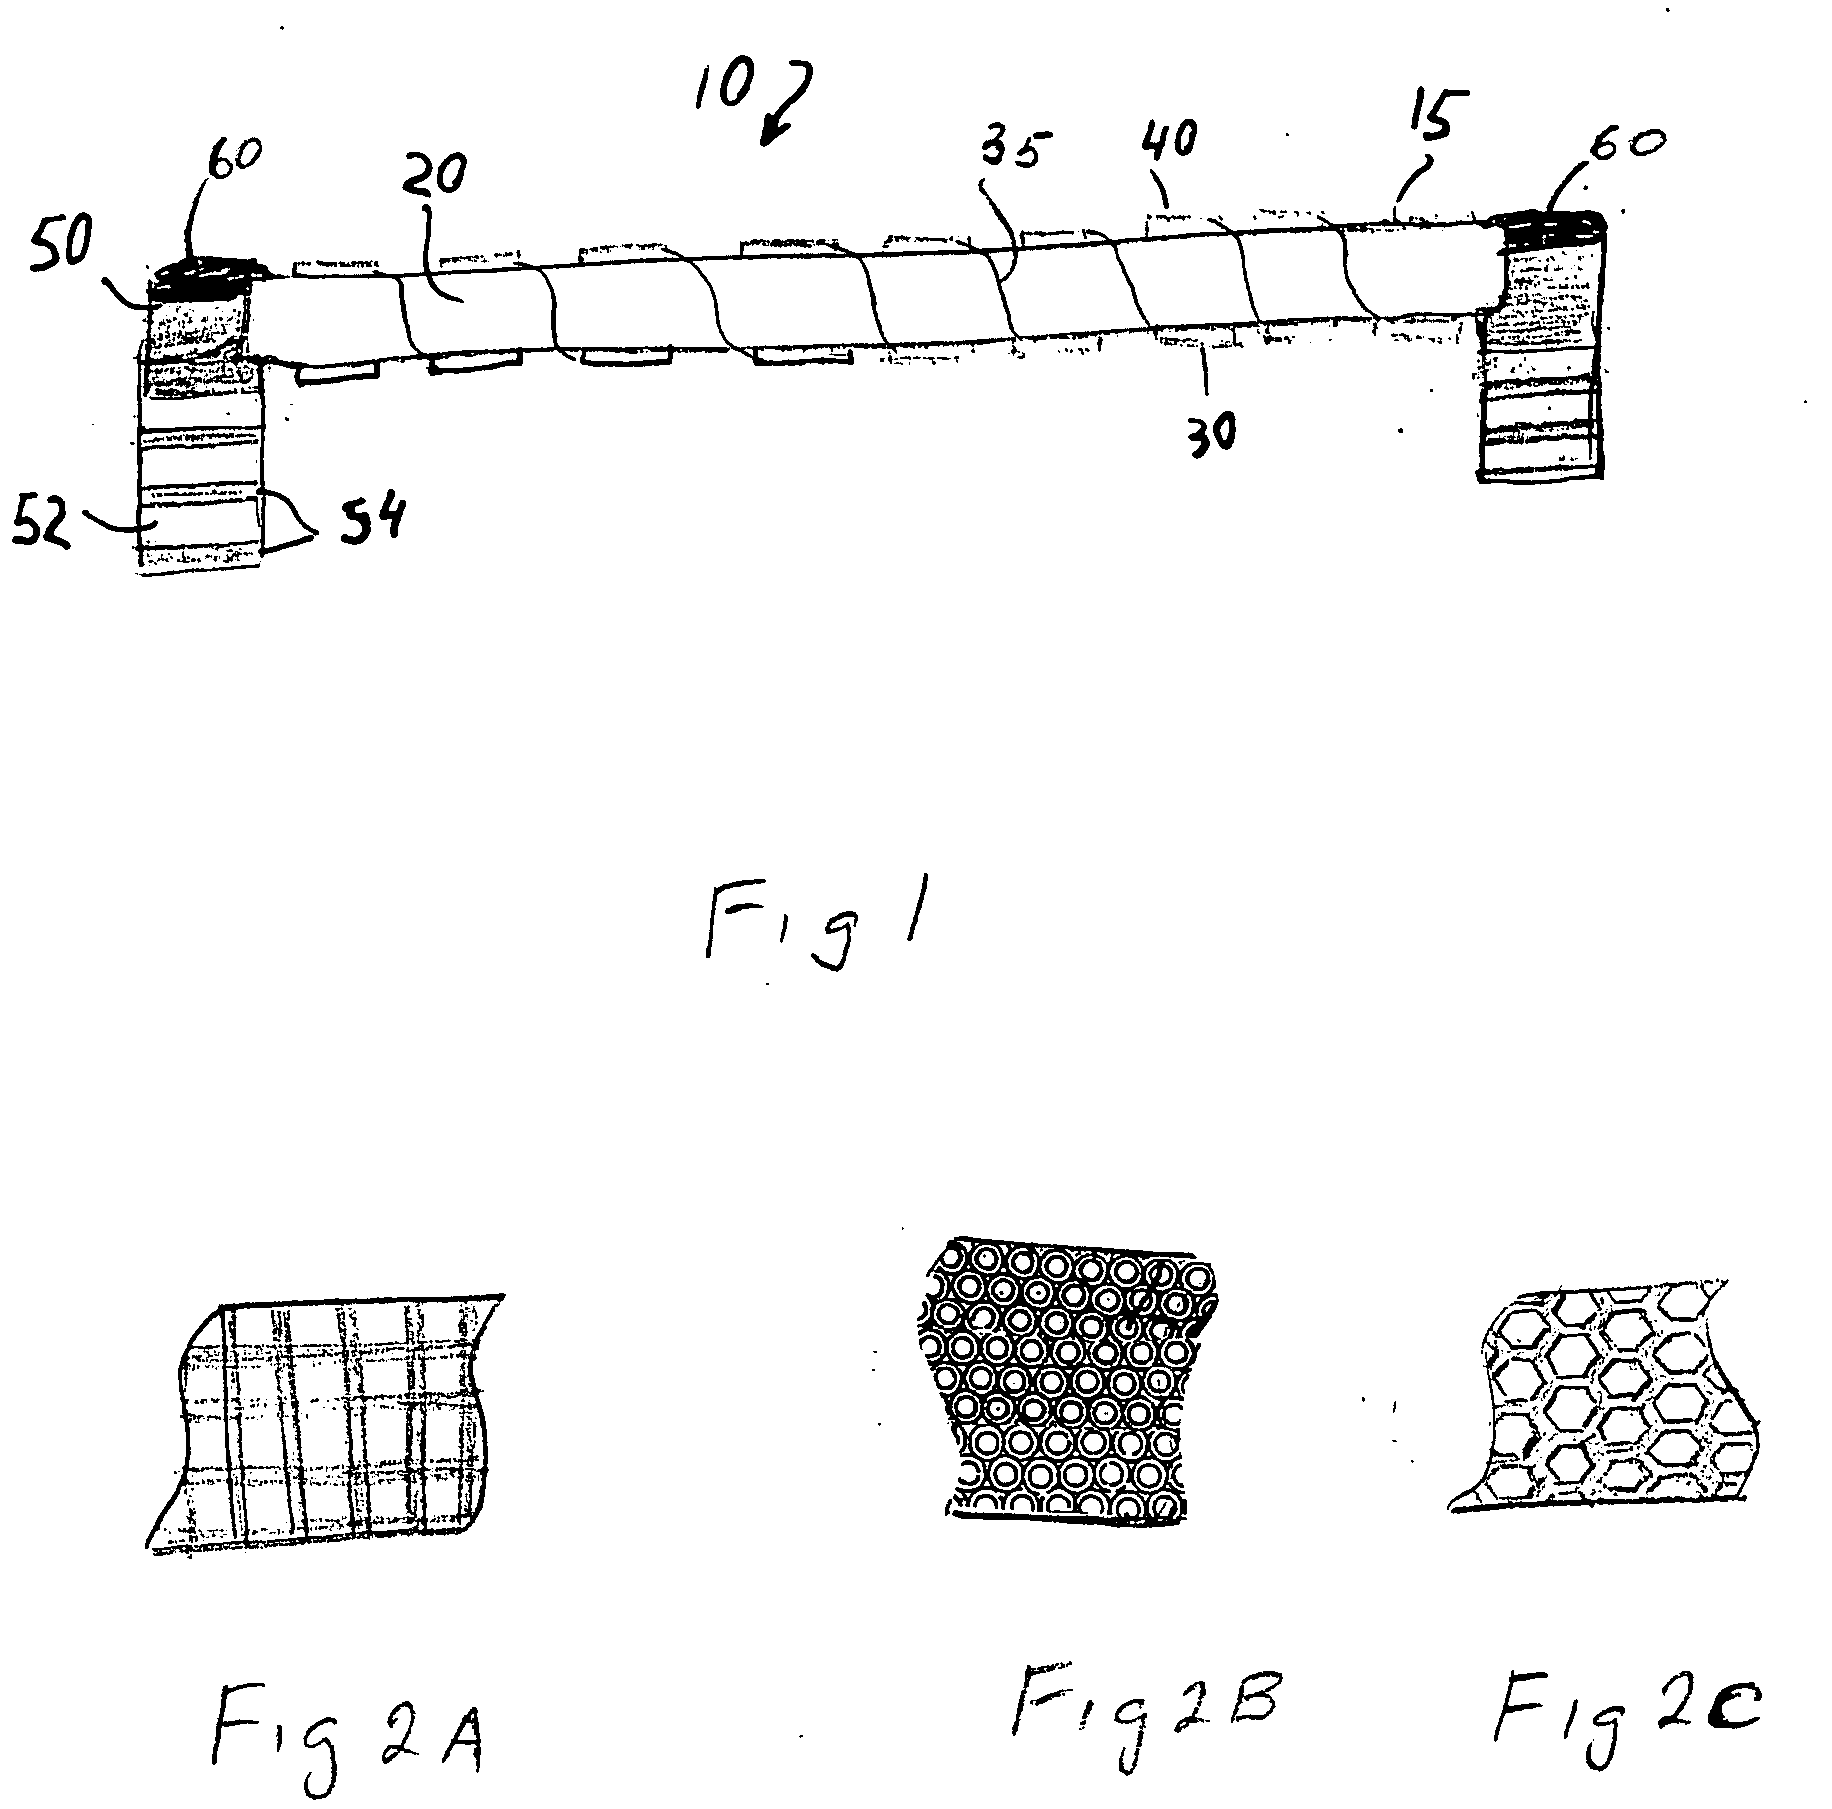 Fuel cell device assembly and frame